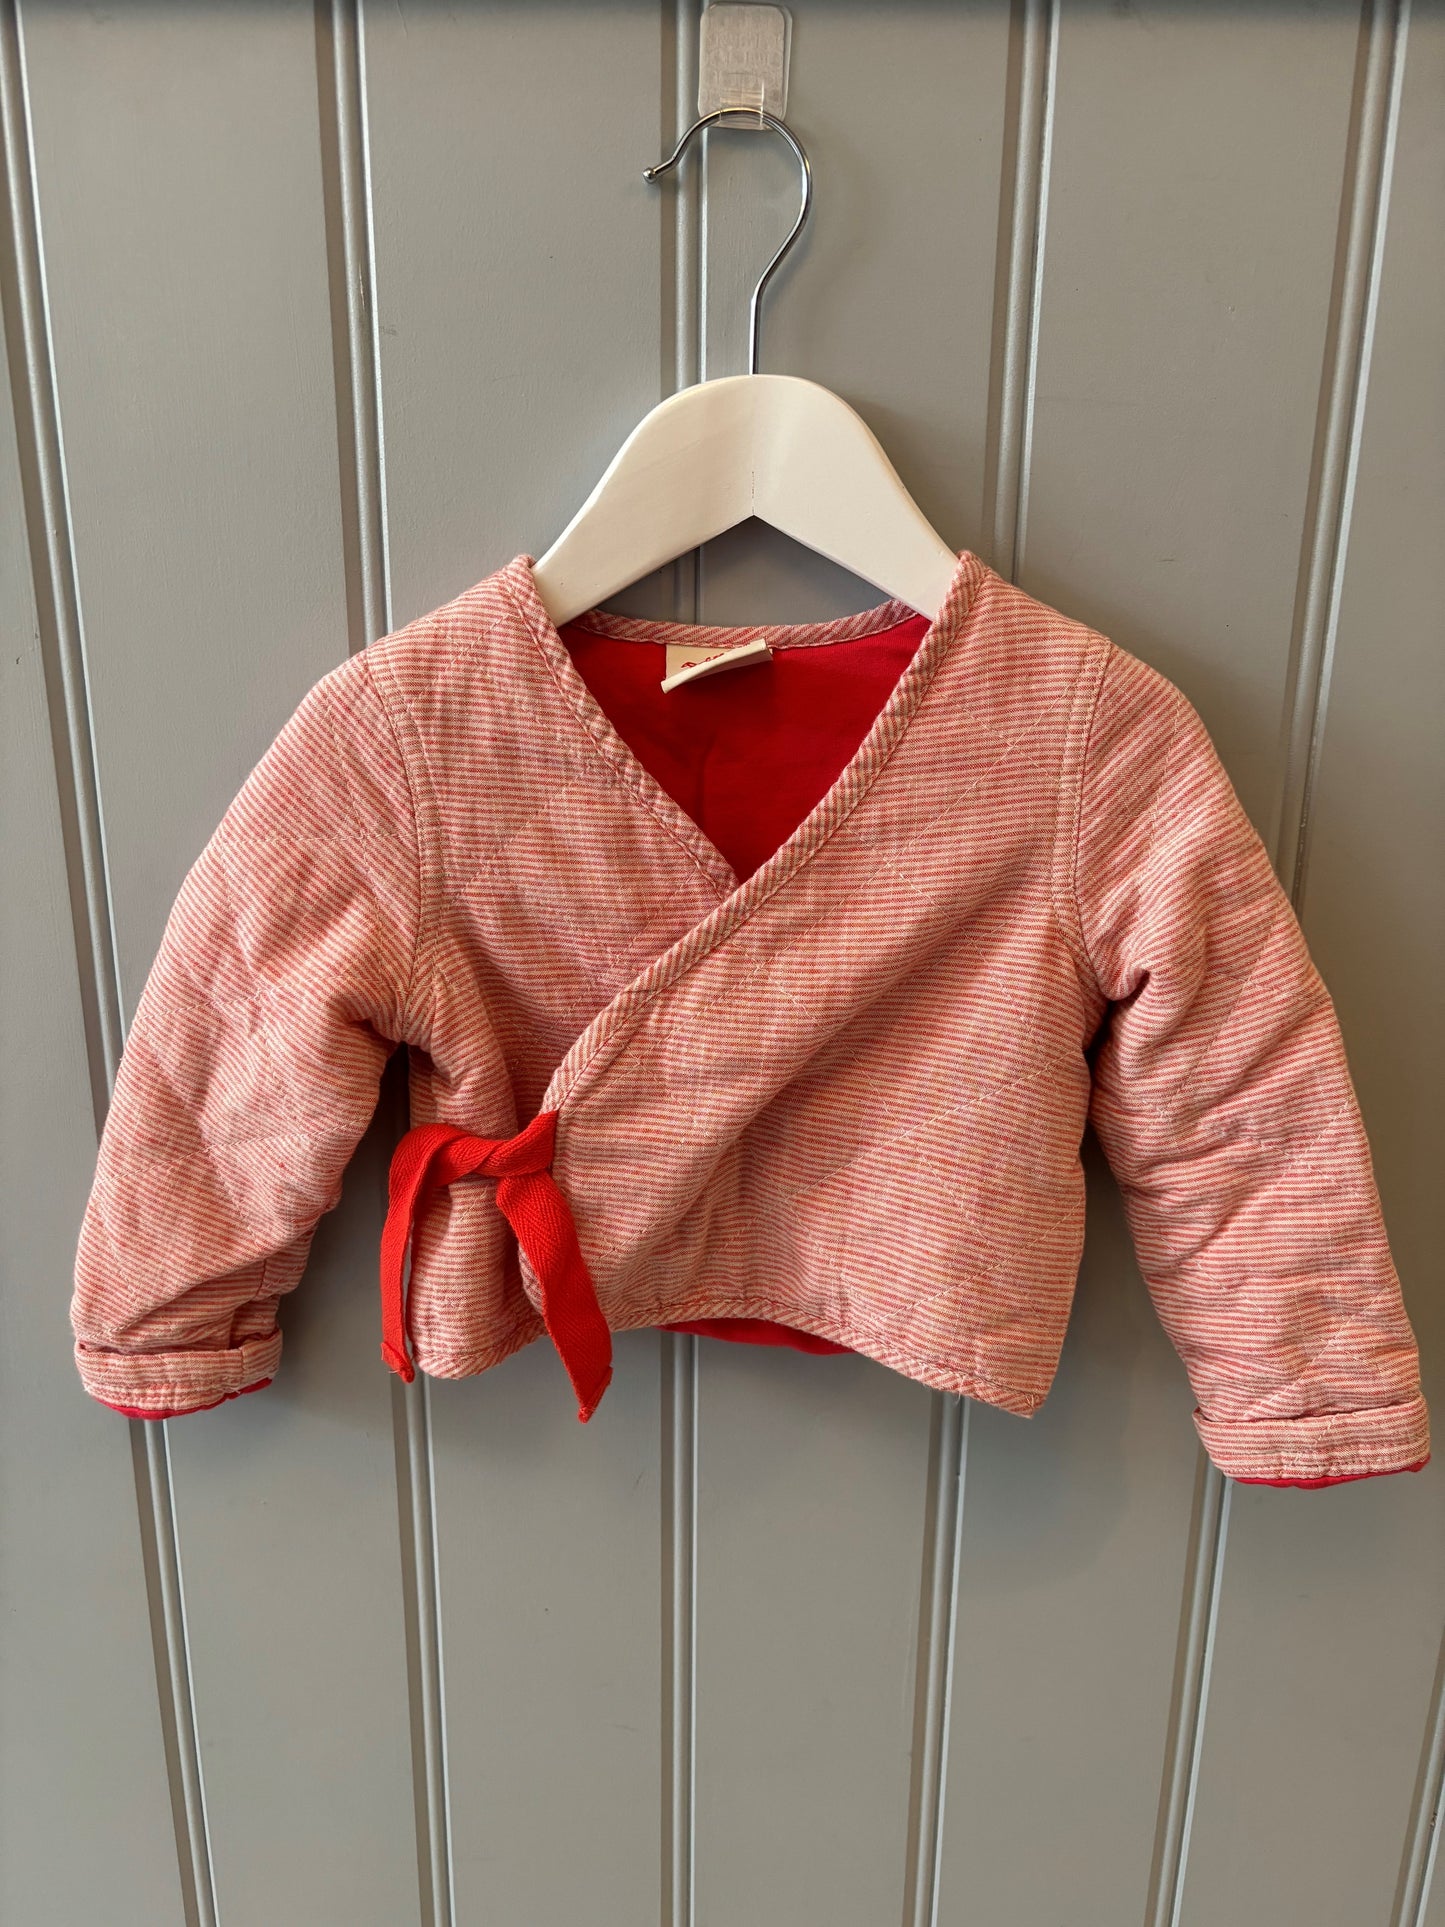 Pre-loved Baby Jacket by Tootsa MacGinty